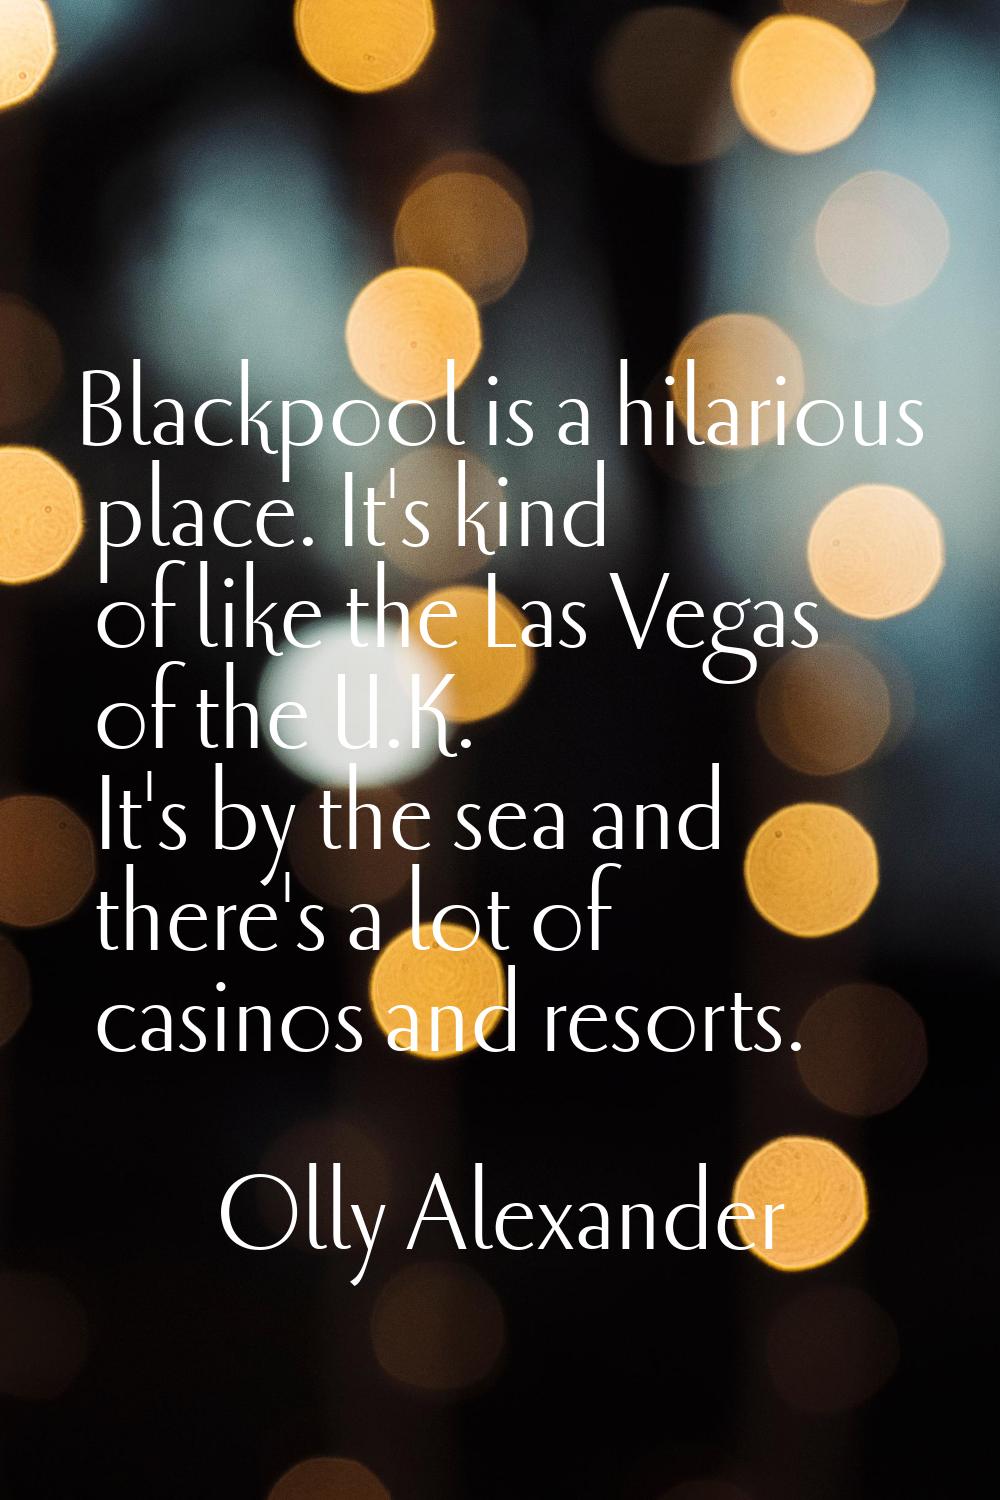 Blackpool is a hilarious place. It's kind of like the Las Vegas of the U.K. It's by the sea and the